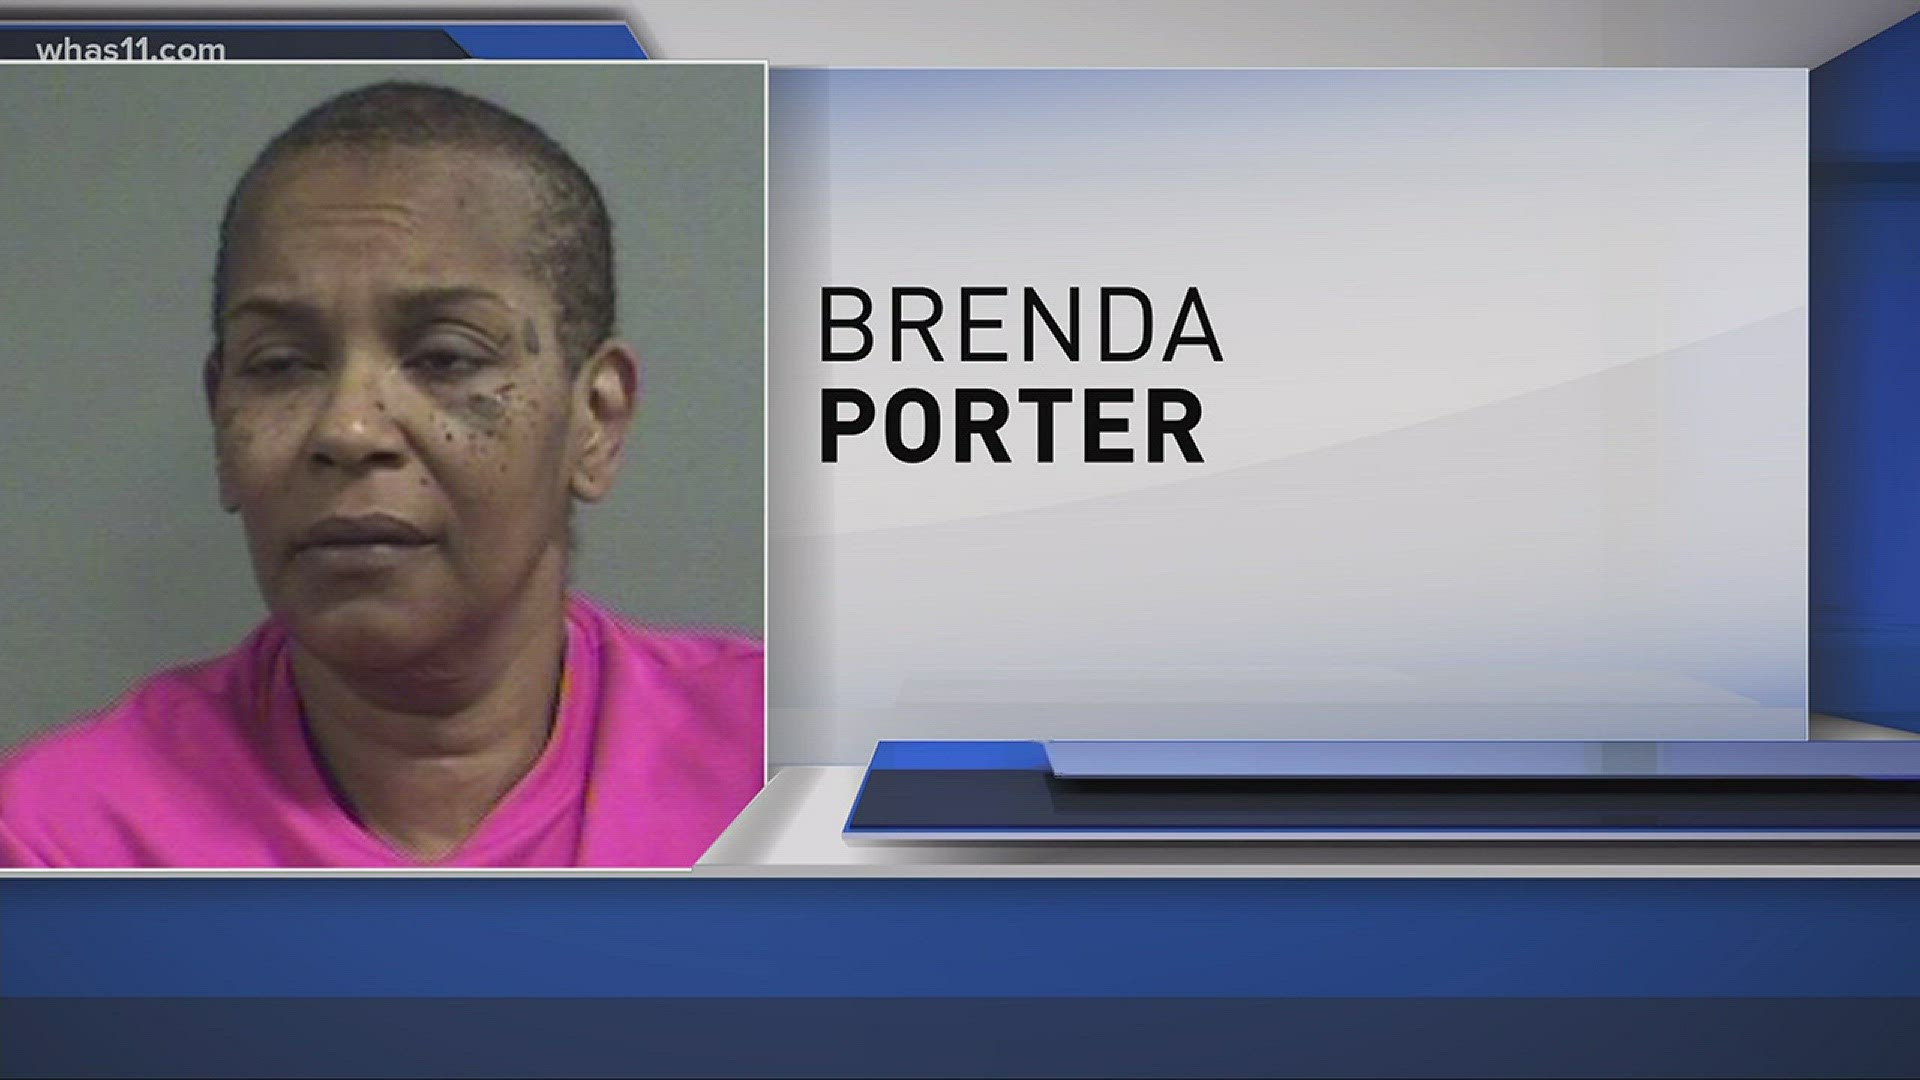 Brenda Porter, 57, was arrested and charged with domestic violence murder, tampering with physical evidence and abuse of a corpse.